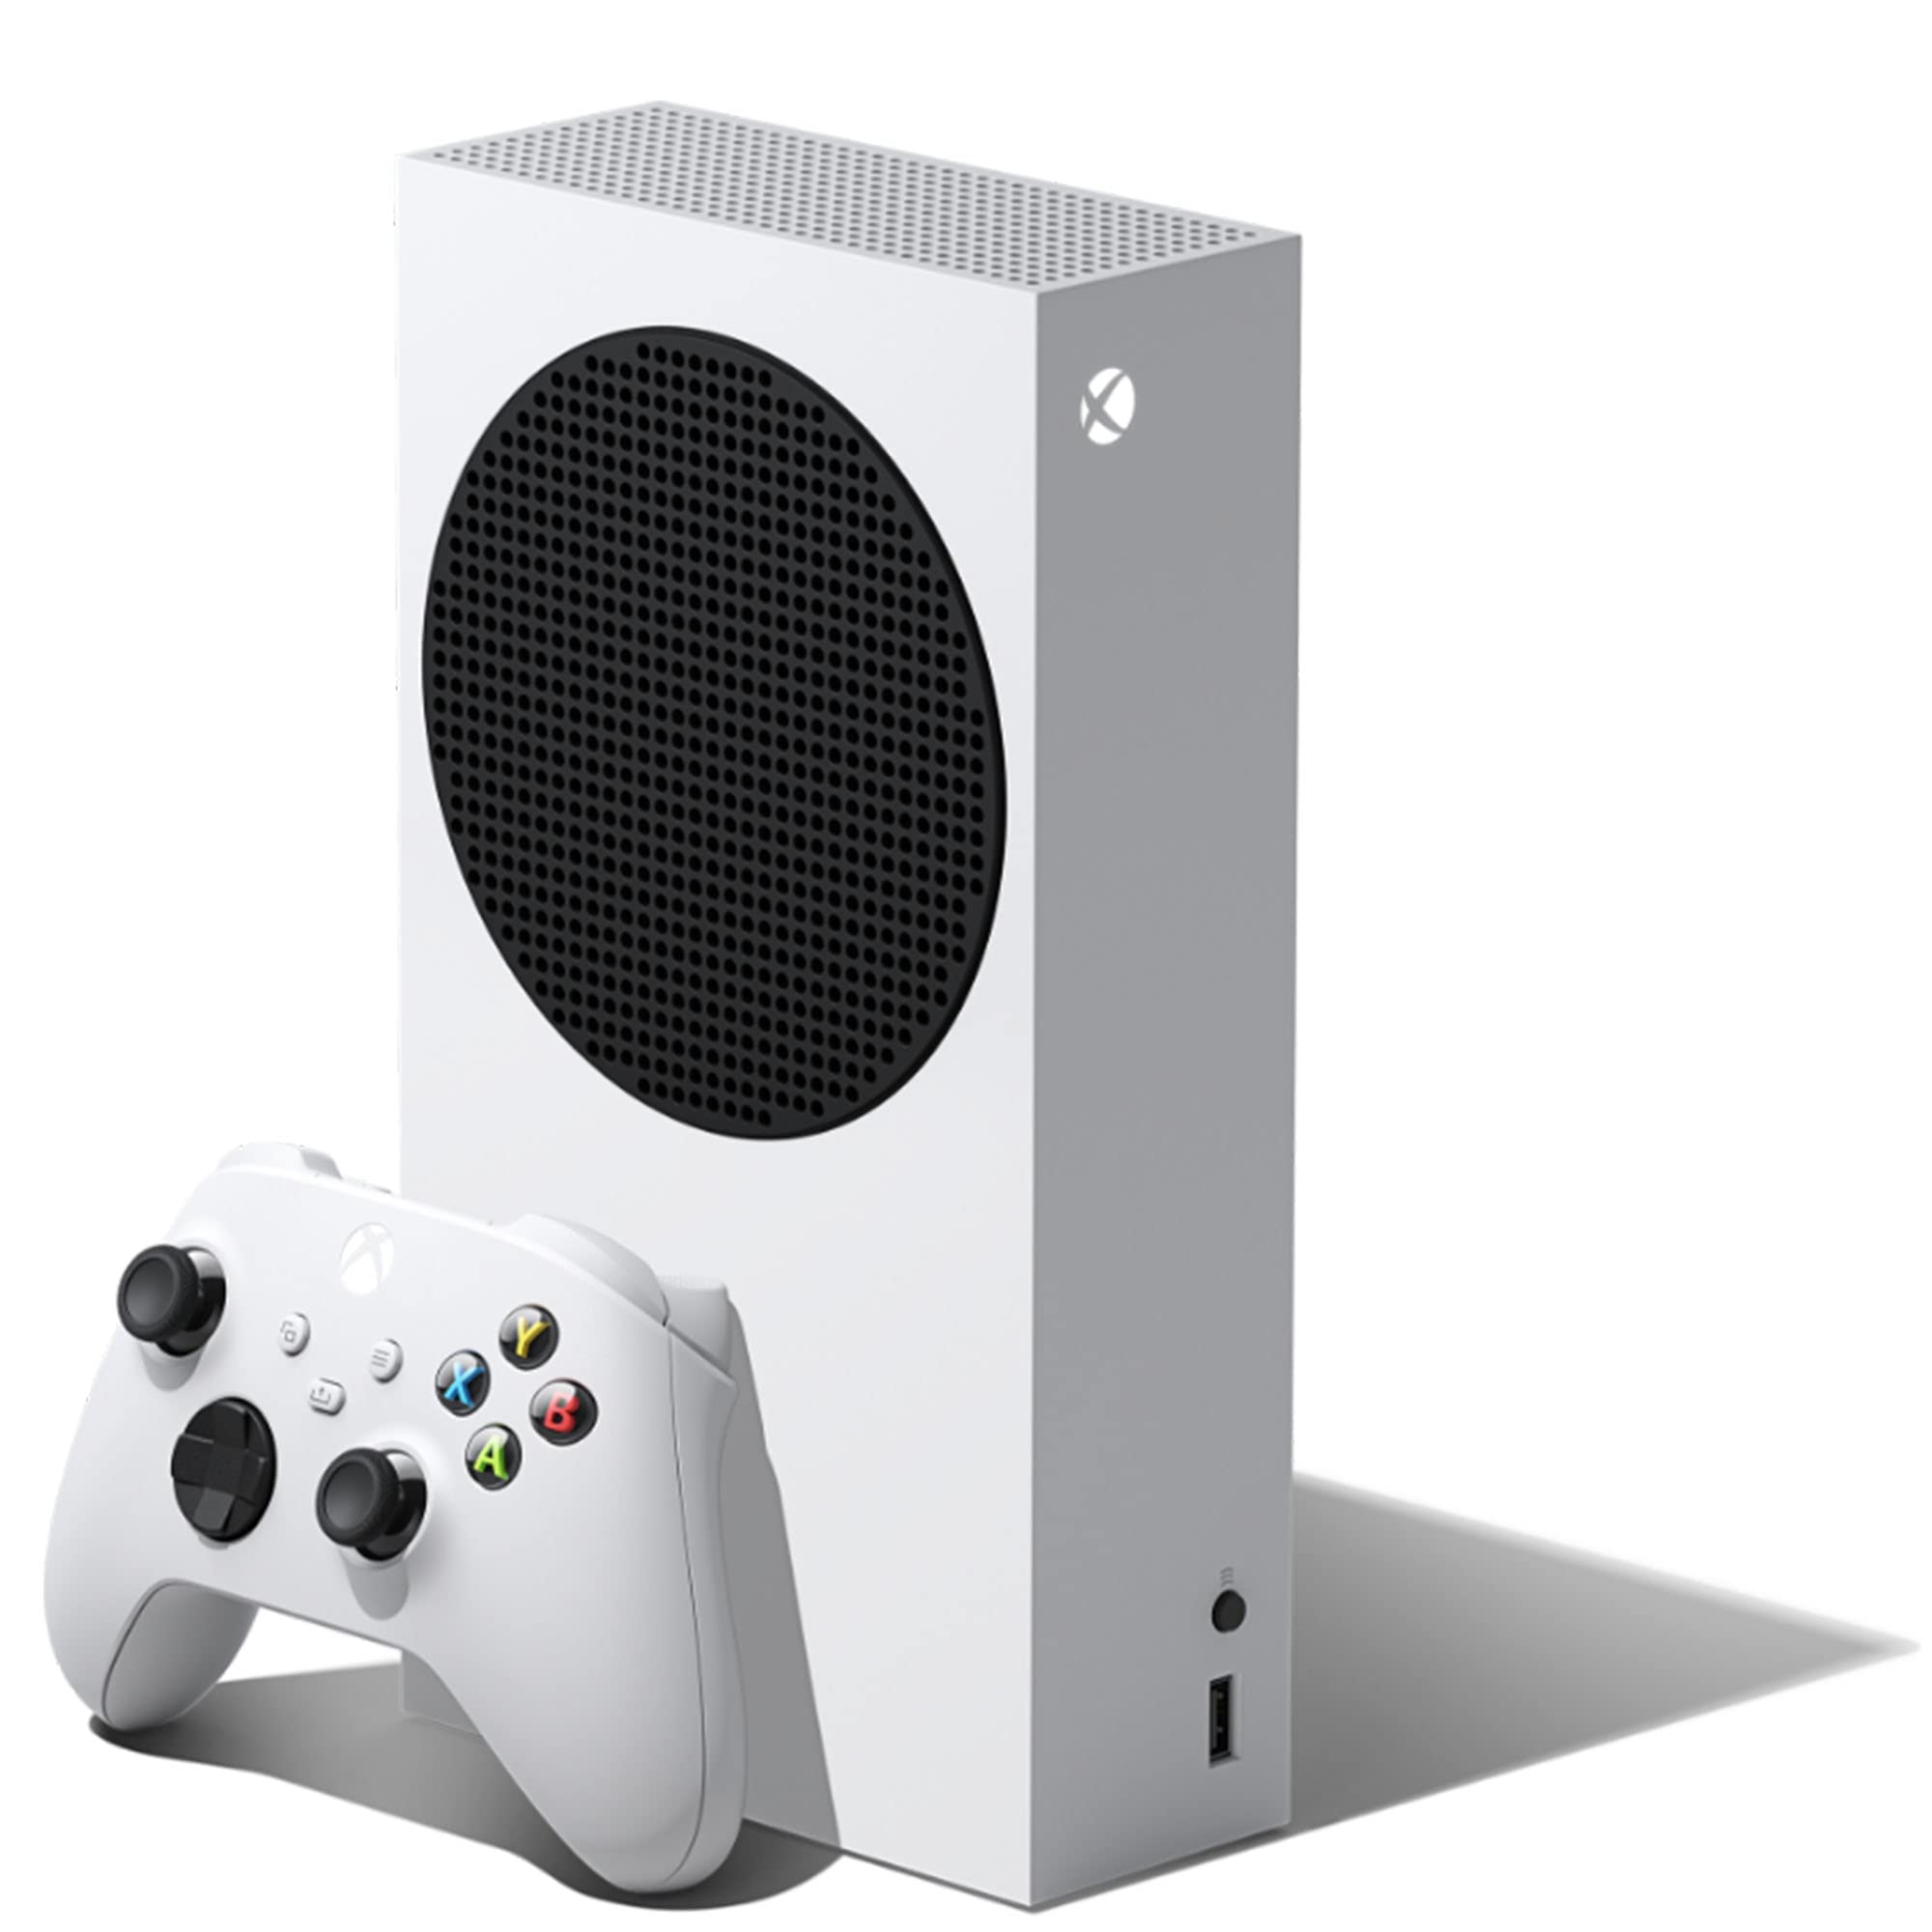 Microsoft Xbox Series S 512GB SSD All-Digital Console(Disc-Free Gaming), Wireless Controller, Up to 120 FPS, 1440p Gaming Resolution, HDR, AMD FreeSync, USB Extension Cable (Fortnite & Rocket League) (Renewed)